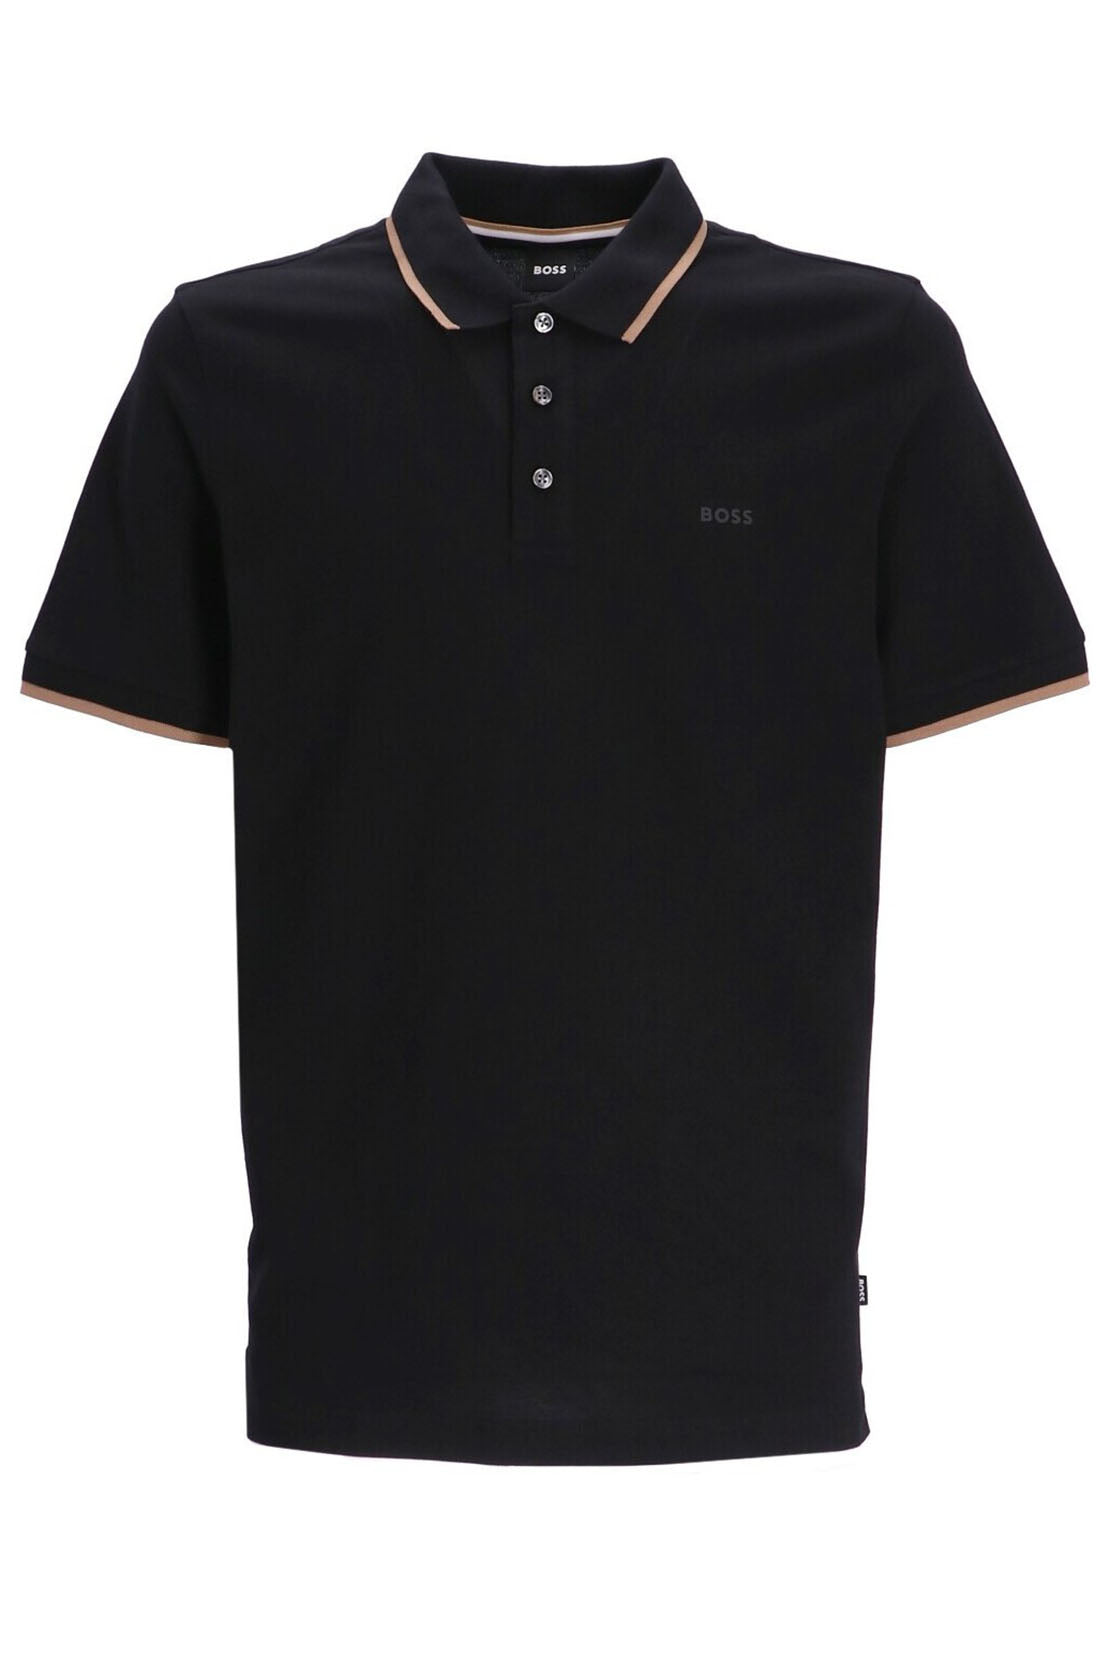 BOSS - PARLEY 190 Black Logo Embossed Cotton Pique Polo Shirt 